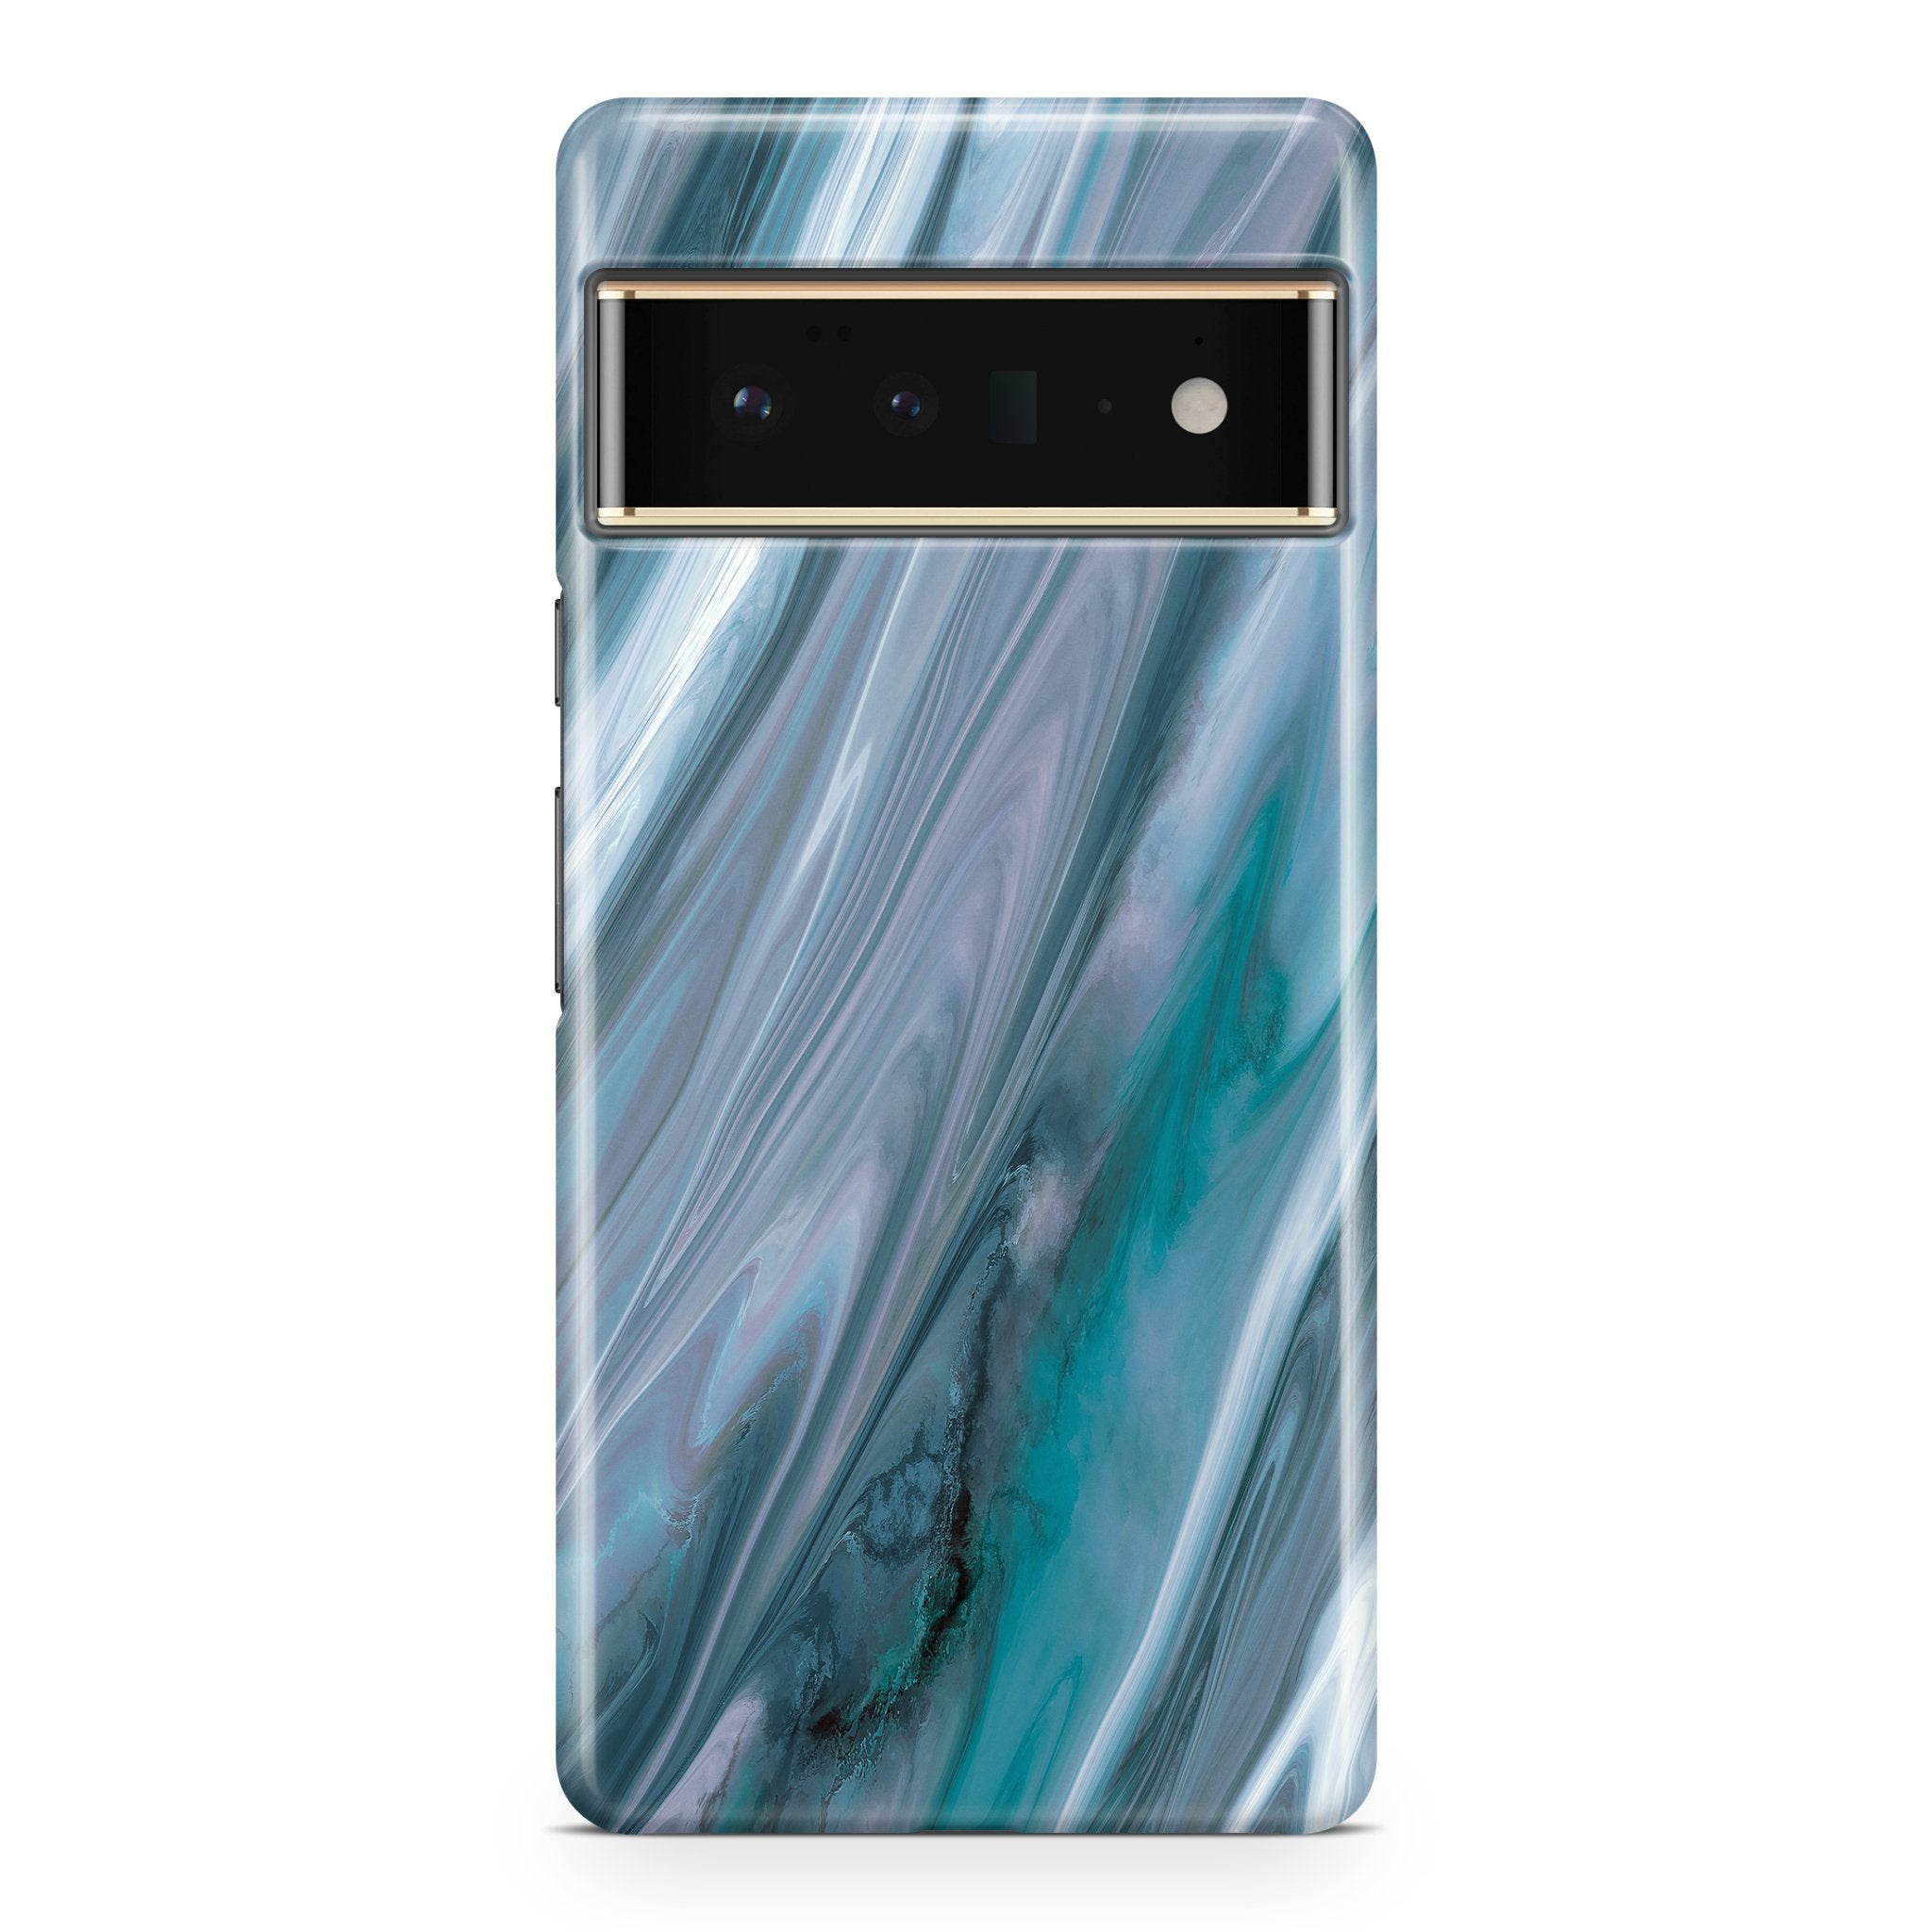 Grey & Turquoise Agate - Google phone case designs by CaseSwagger